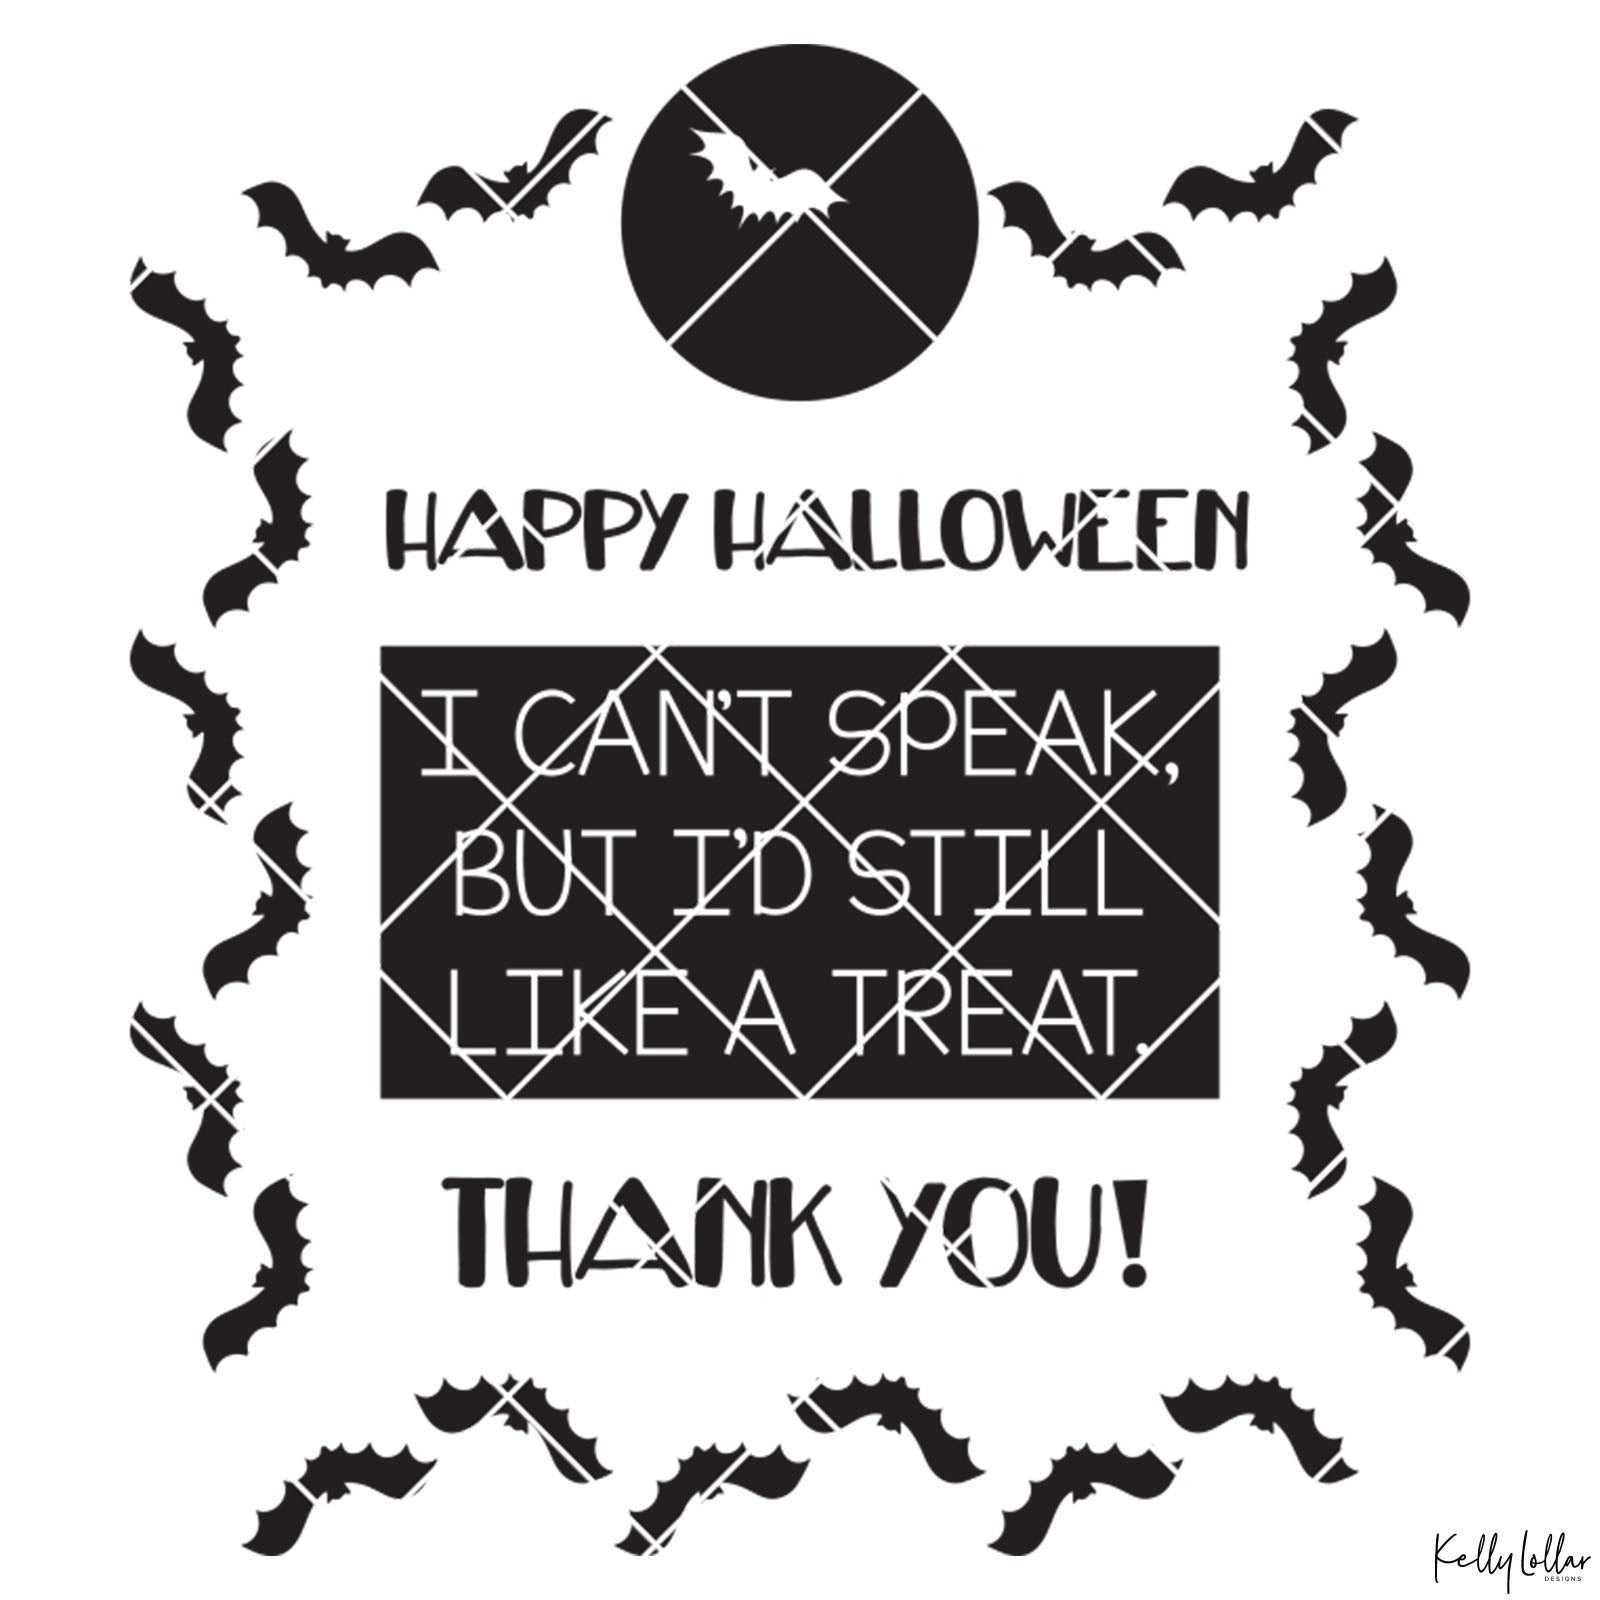 Bat Filled Non-verbal Trick or Treat Bag Design for Halloween | SVG DXF EPS PNG Cut Files | Free for Commercial Use